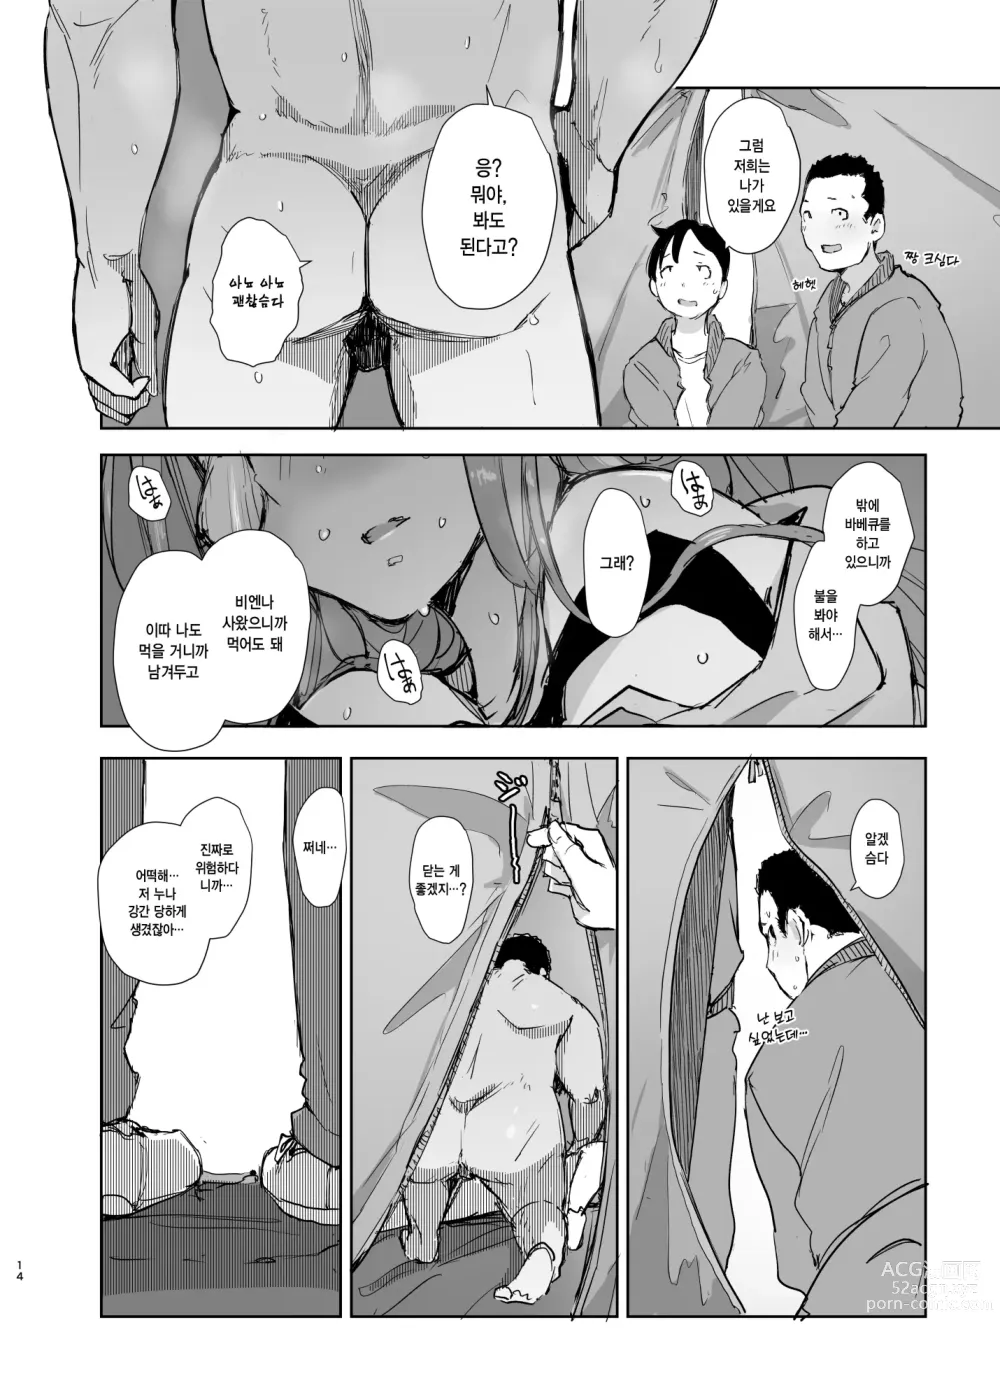 Page 13 of doujinshi 사쿠라캠